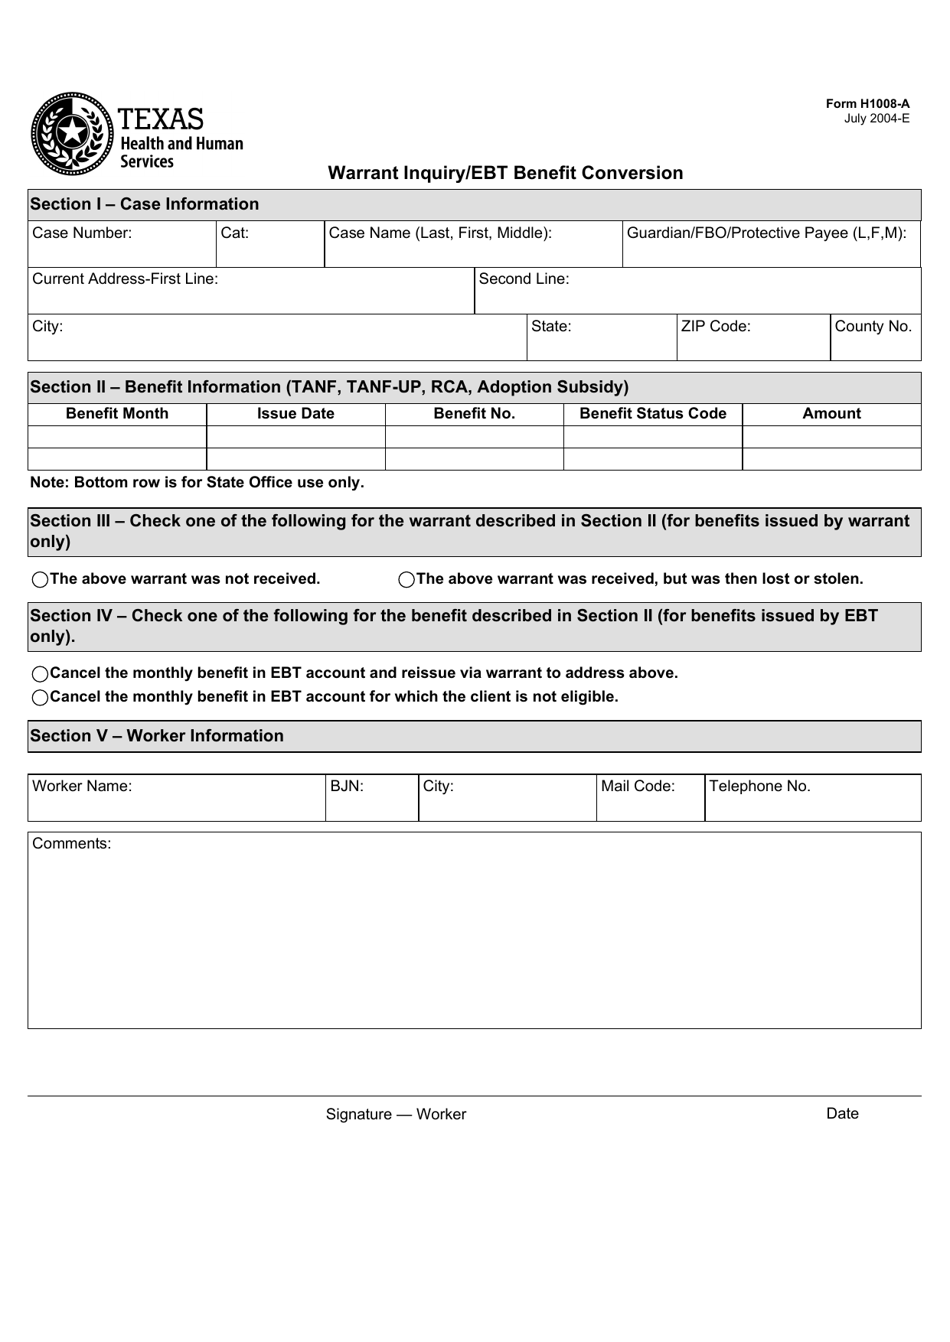 Form H1008-A Warrant Inquiry / Ebt Benefit Conversion and Affidavit for Non-receipt of Warrant - Texas, Page 1